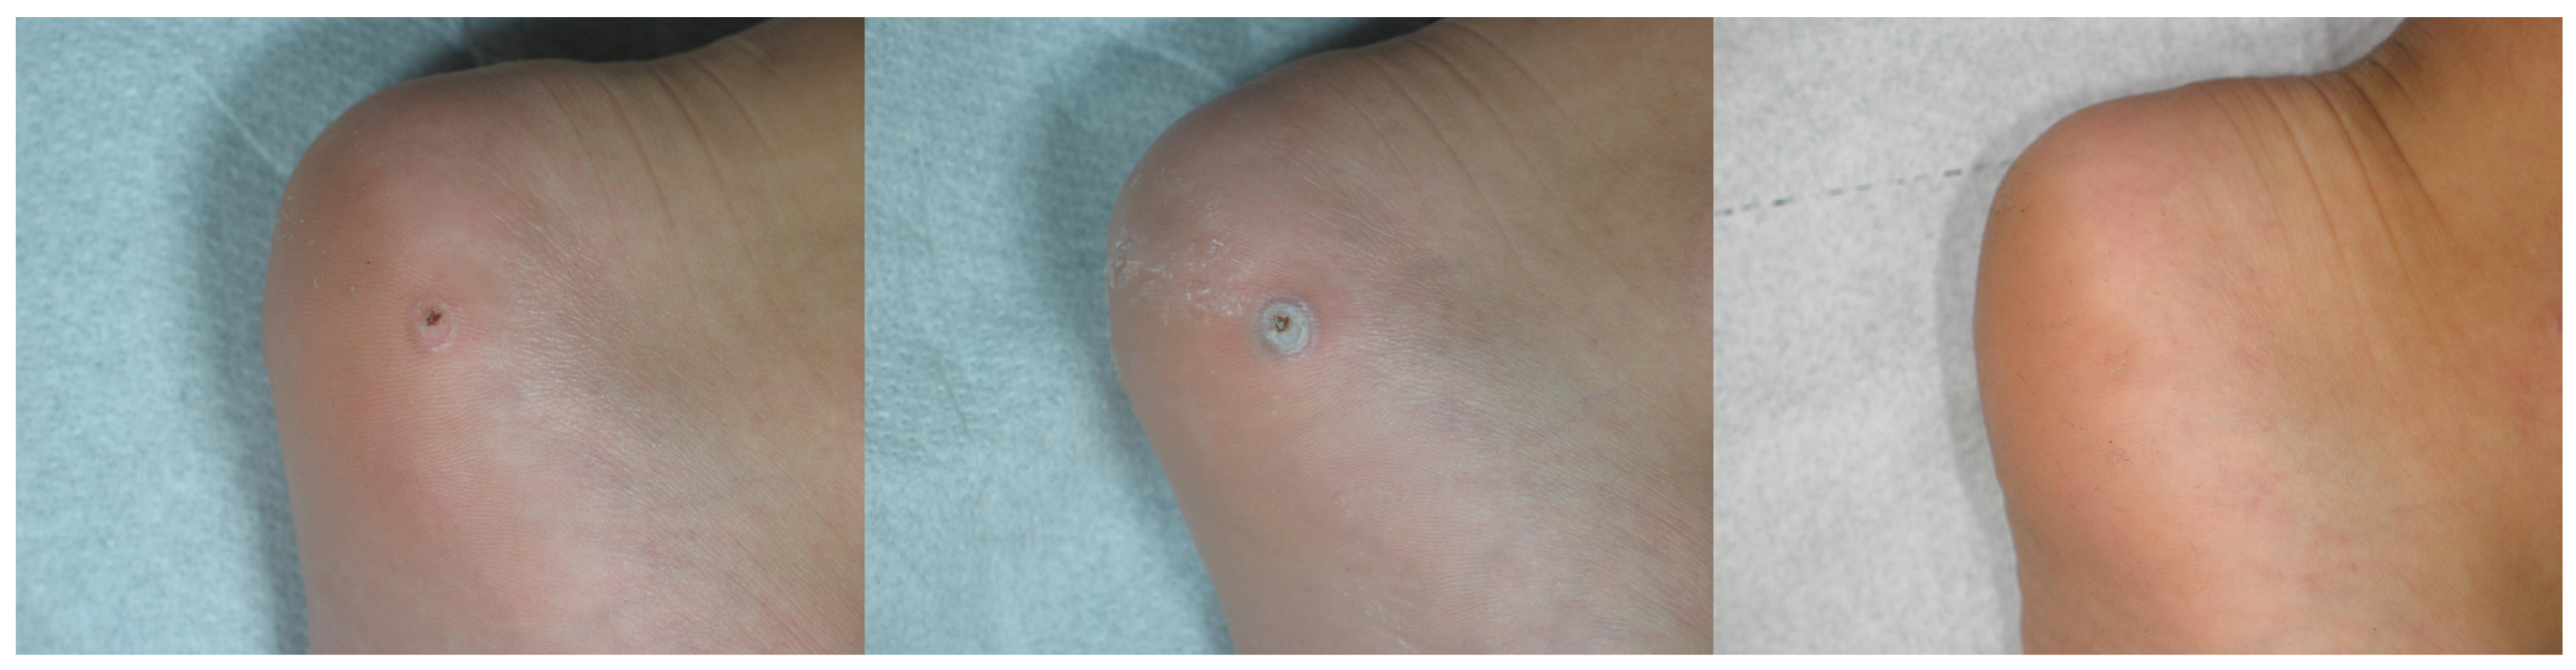 Medicina | Free Full-Text | Sequential Use of CO2 Laser Prior to Nd:YAG and  Dye Laser in the Management of Non-Facial Warts: A Retrospective Study